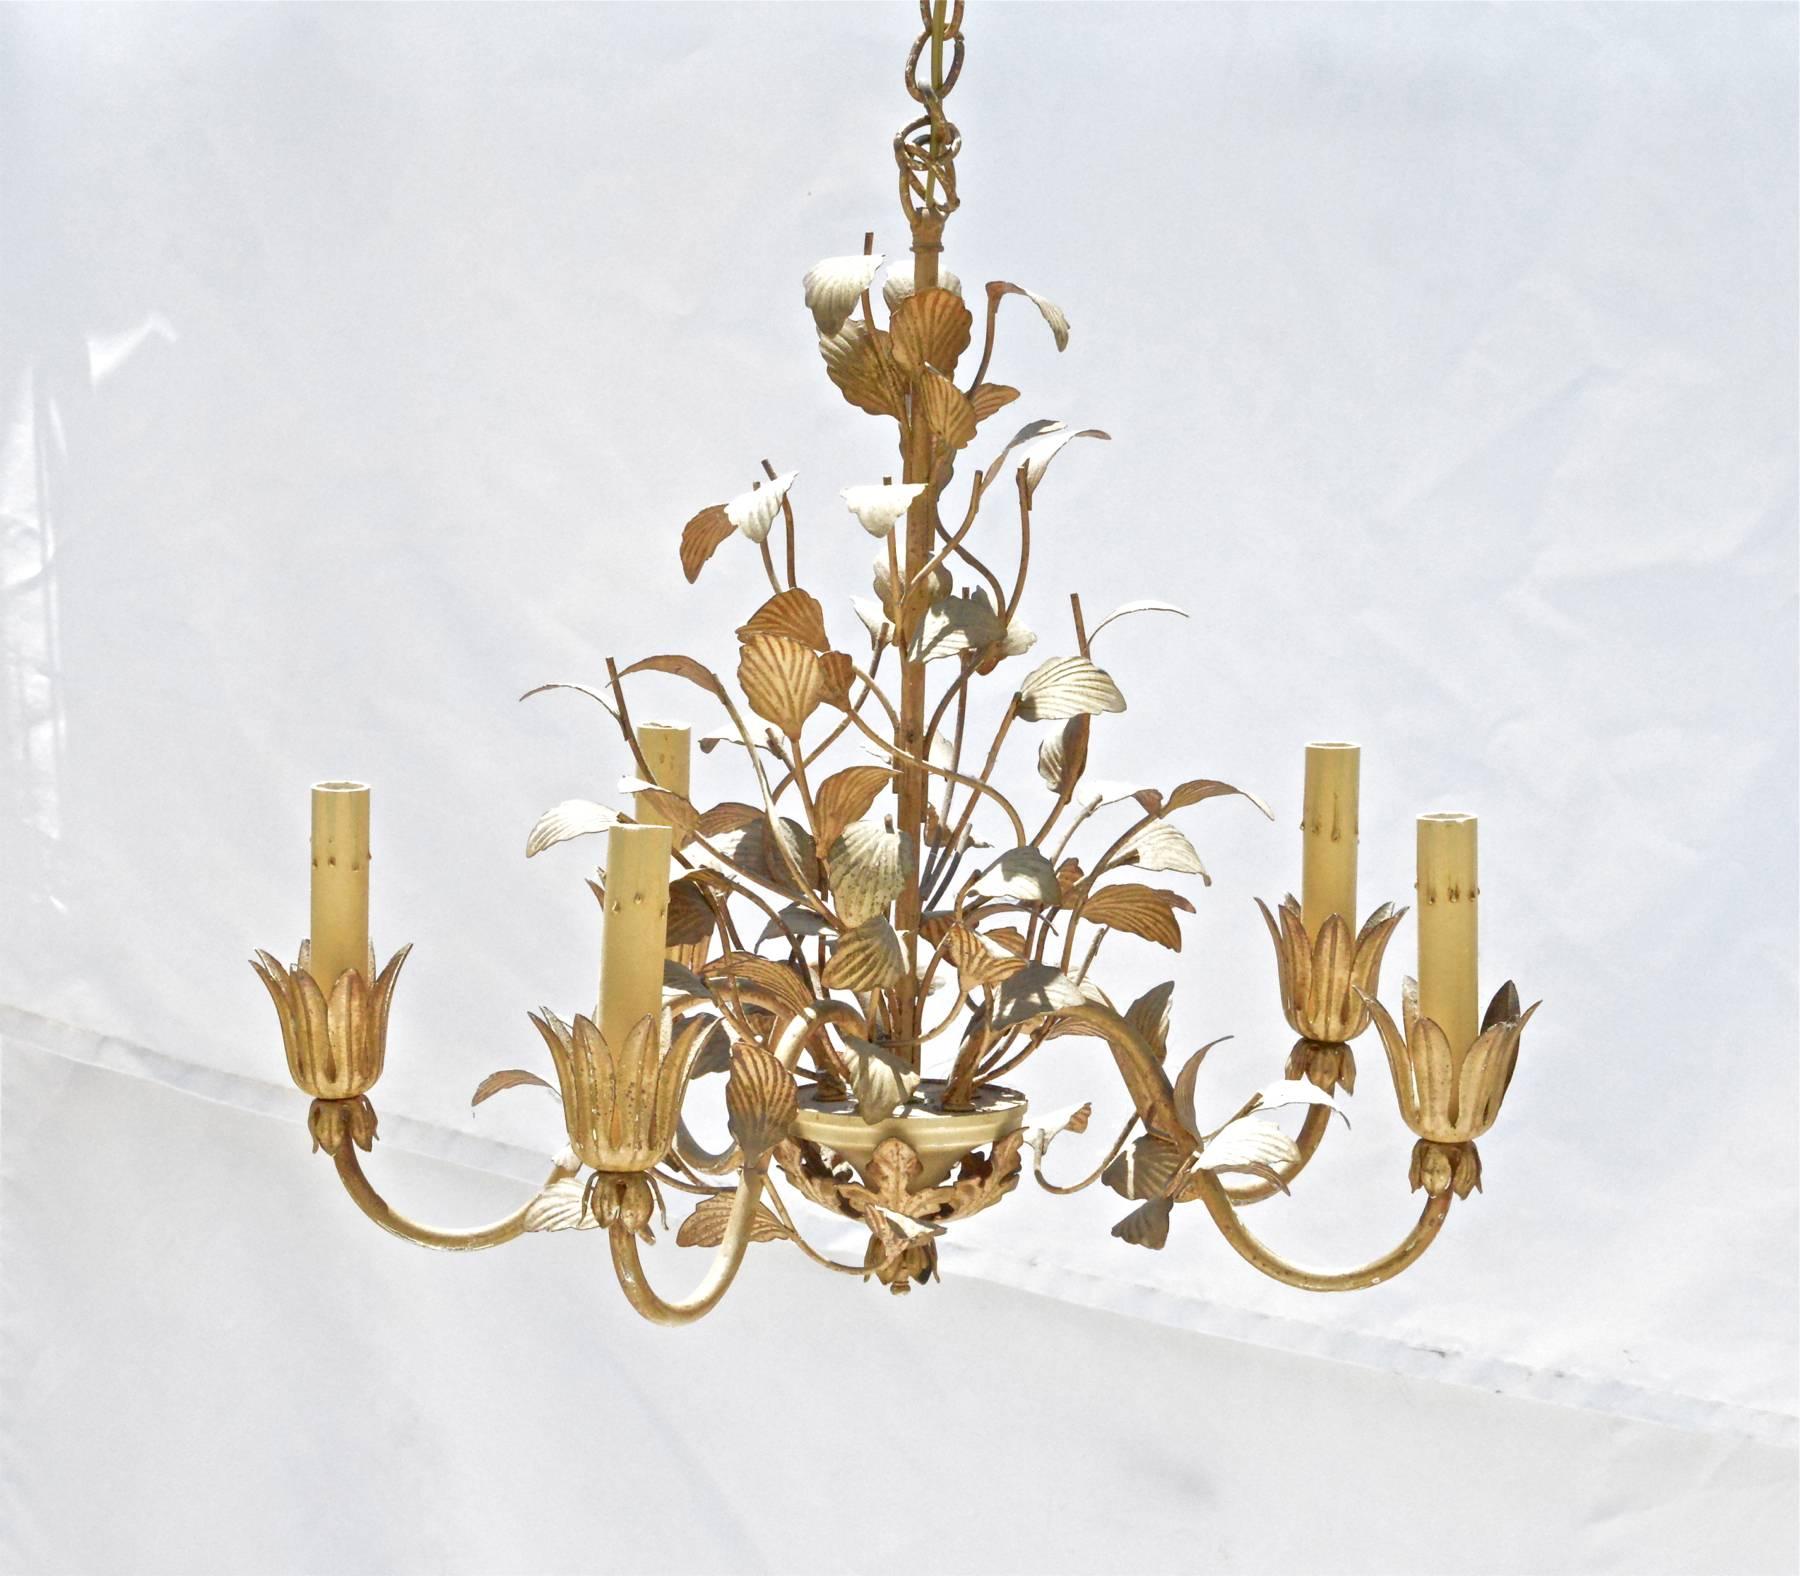 A petite tole' painted chandelier having five arms and five lights. Dark cream and umber tones. Size is perfect for a rustic powder-room. In good working condition. Additional photography and video of chandelier working available upon request.